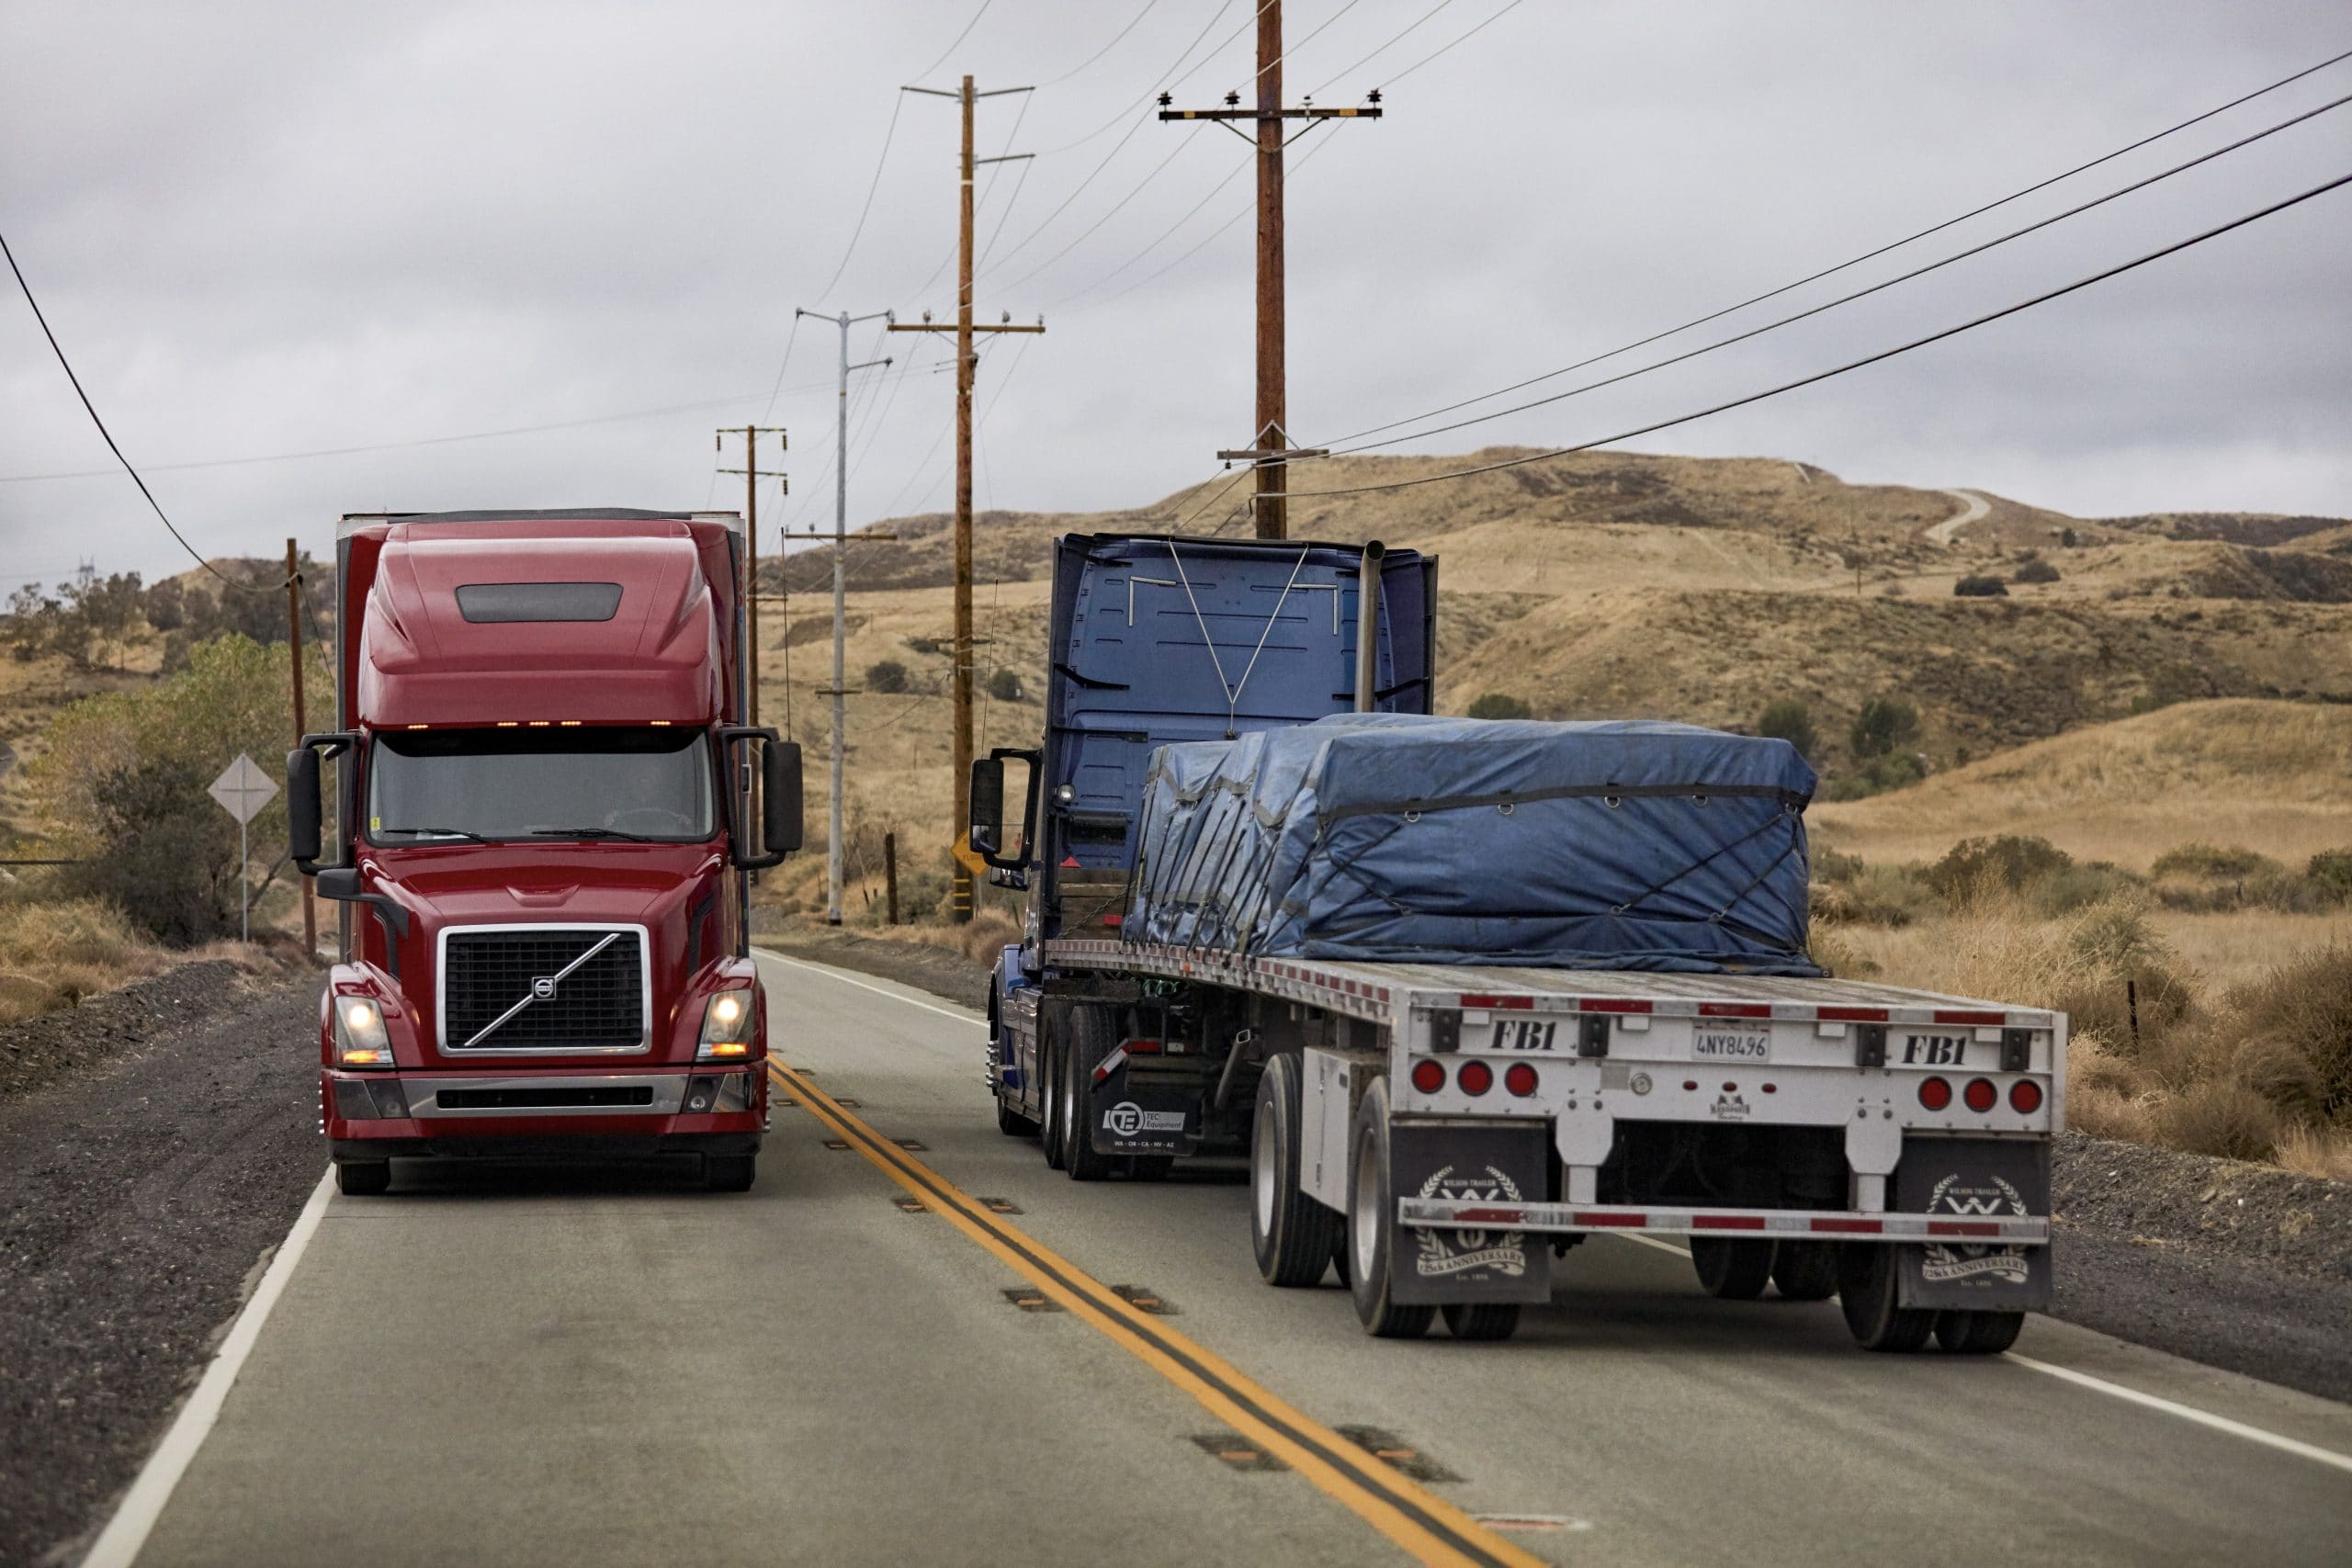 Trucking during the COVID-19 pandemic: helping carriers with Uber Freight load bundles